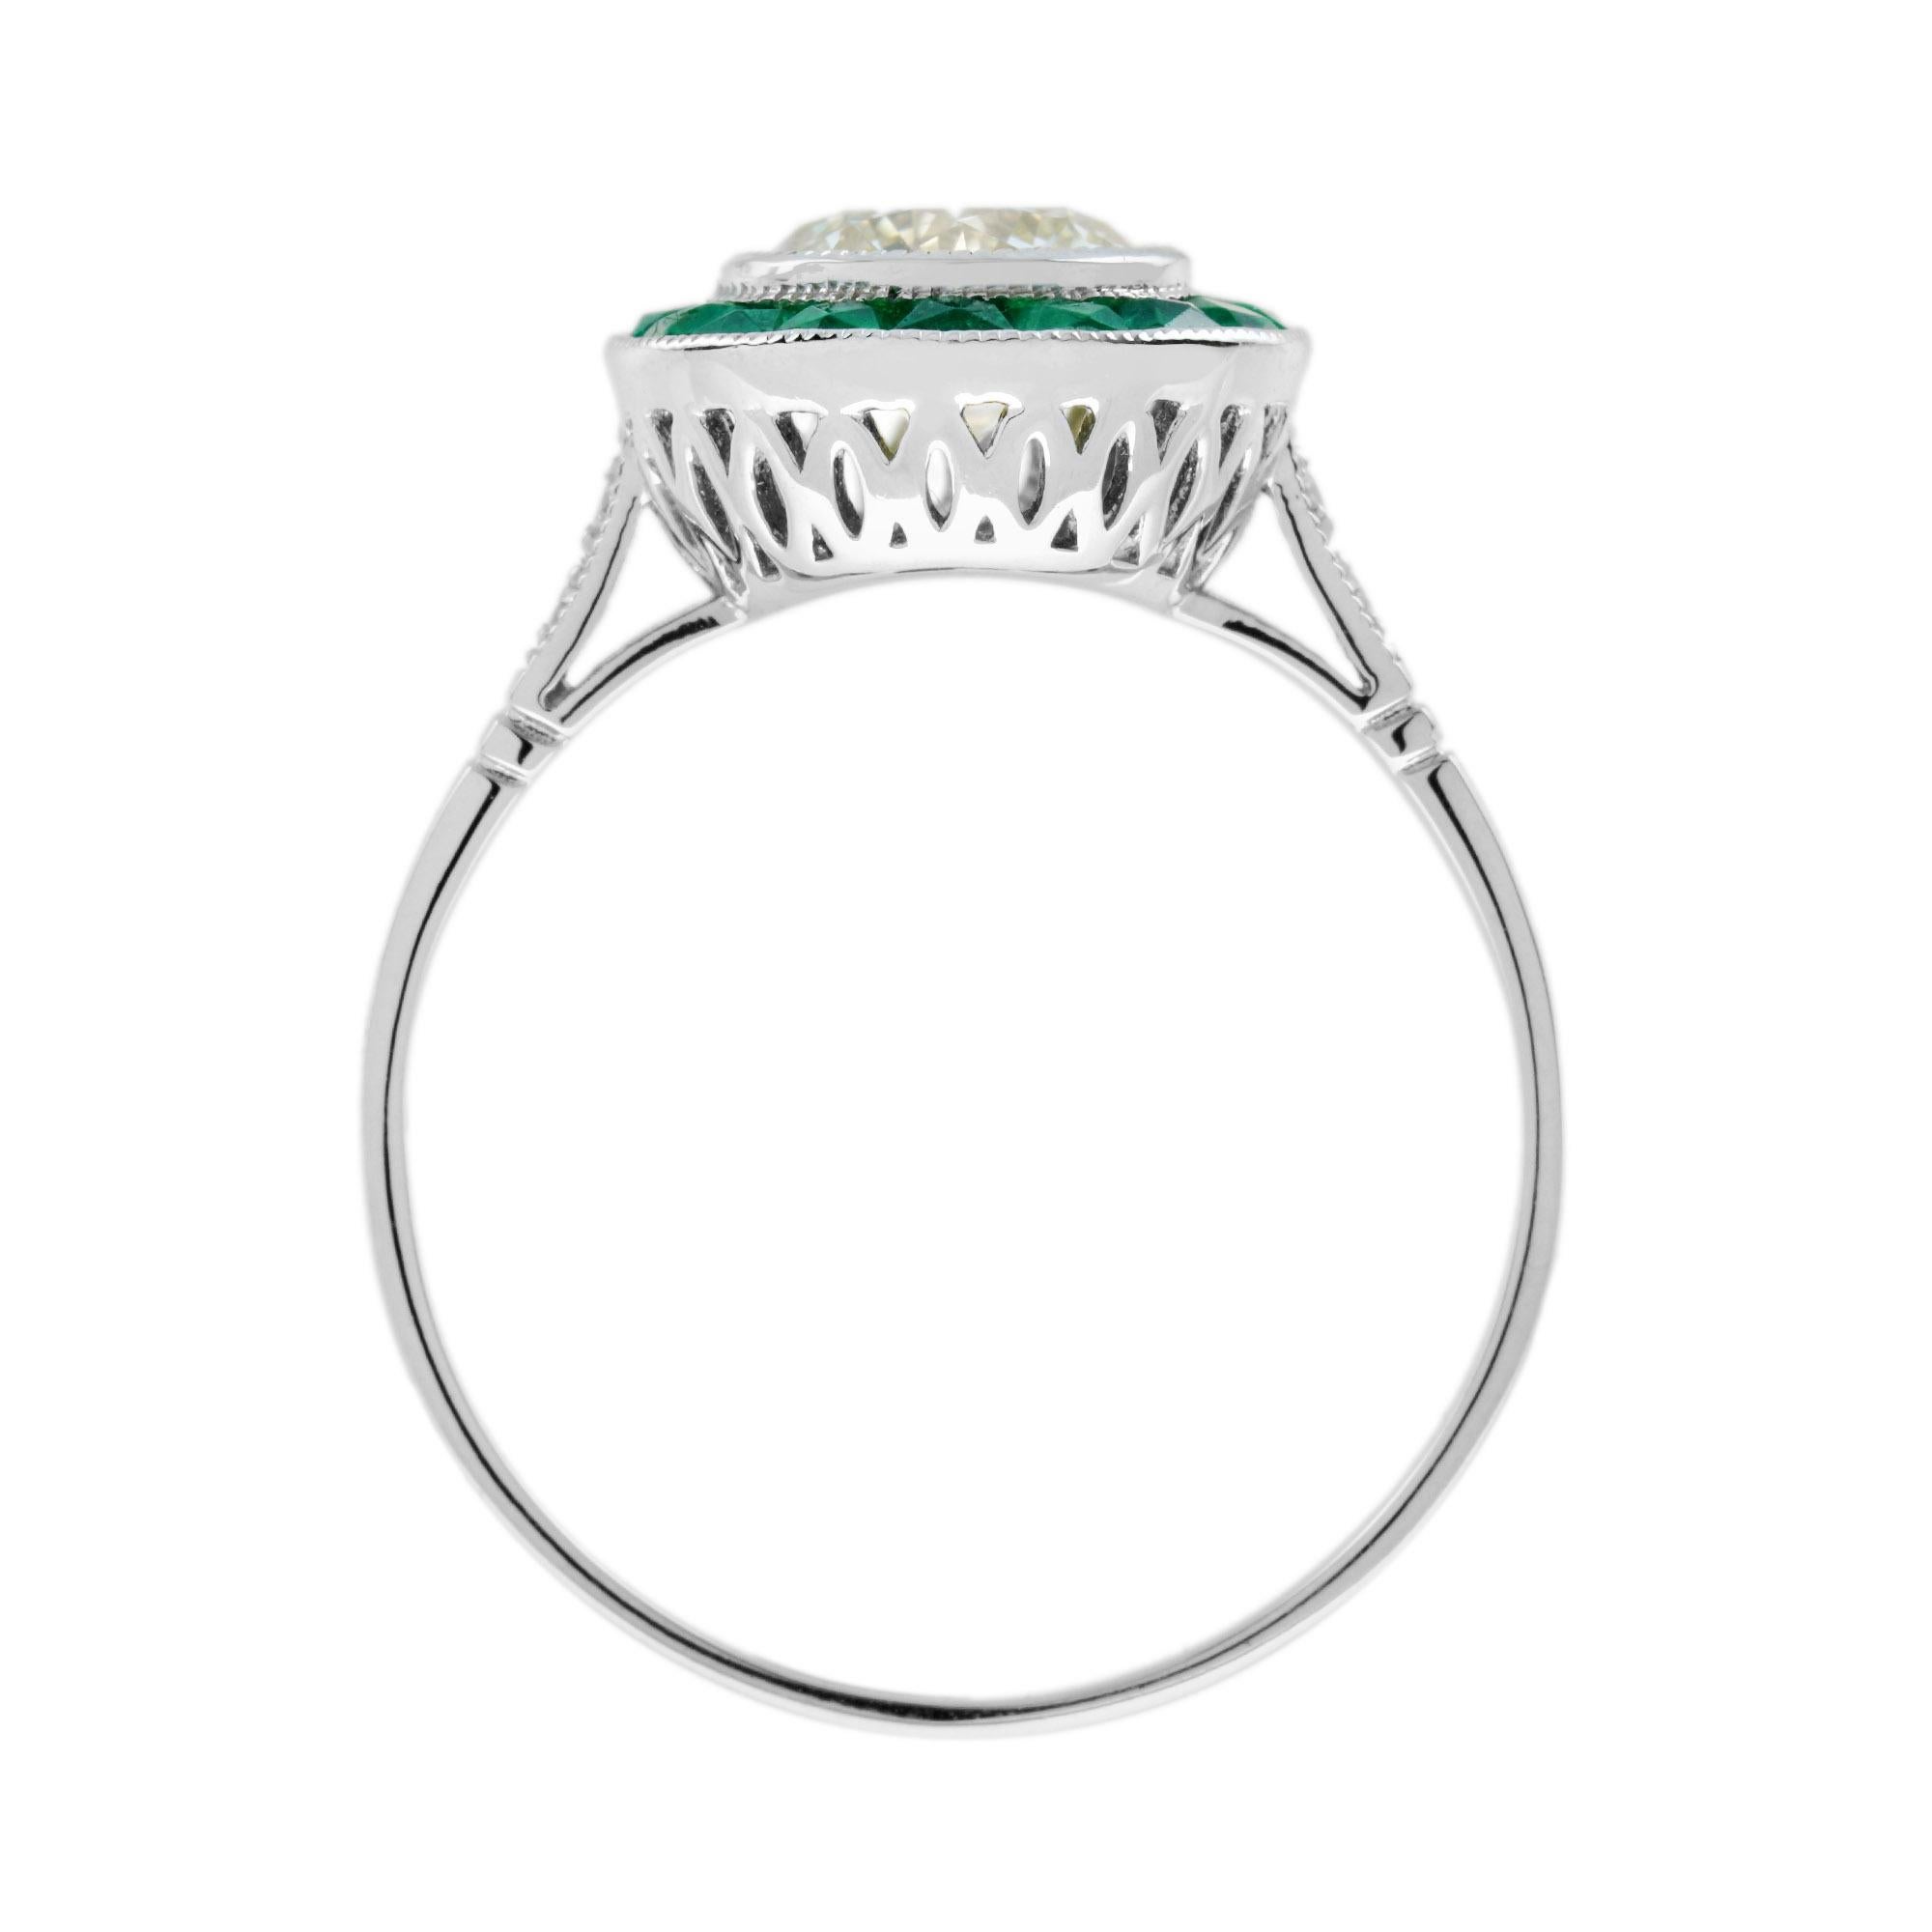 Women's or Men's Certified 1 Ct. Diamond and Emerald Art Deco Style Target Ring in Platinum 950 For Sale